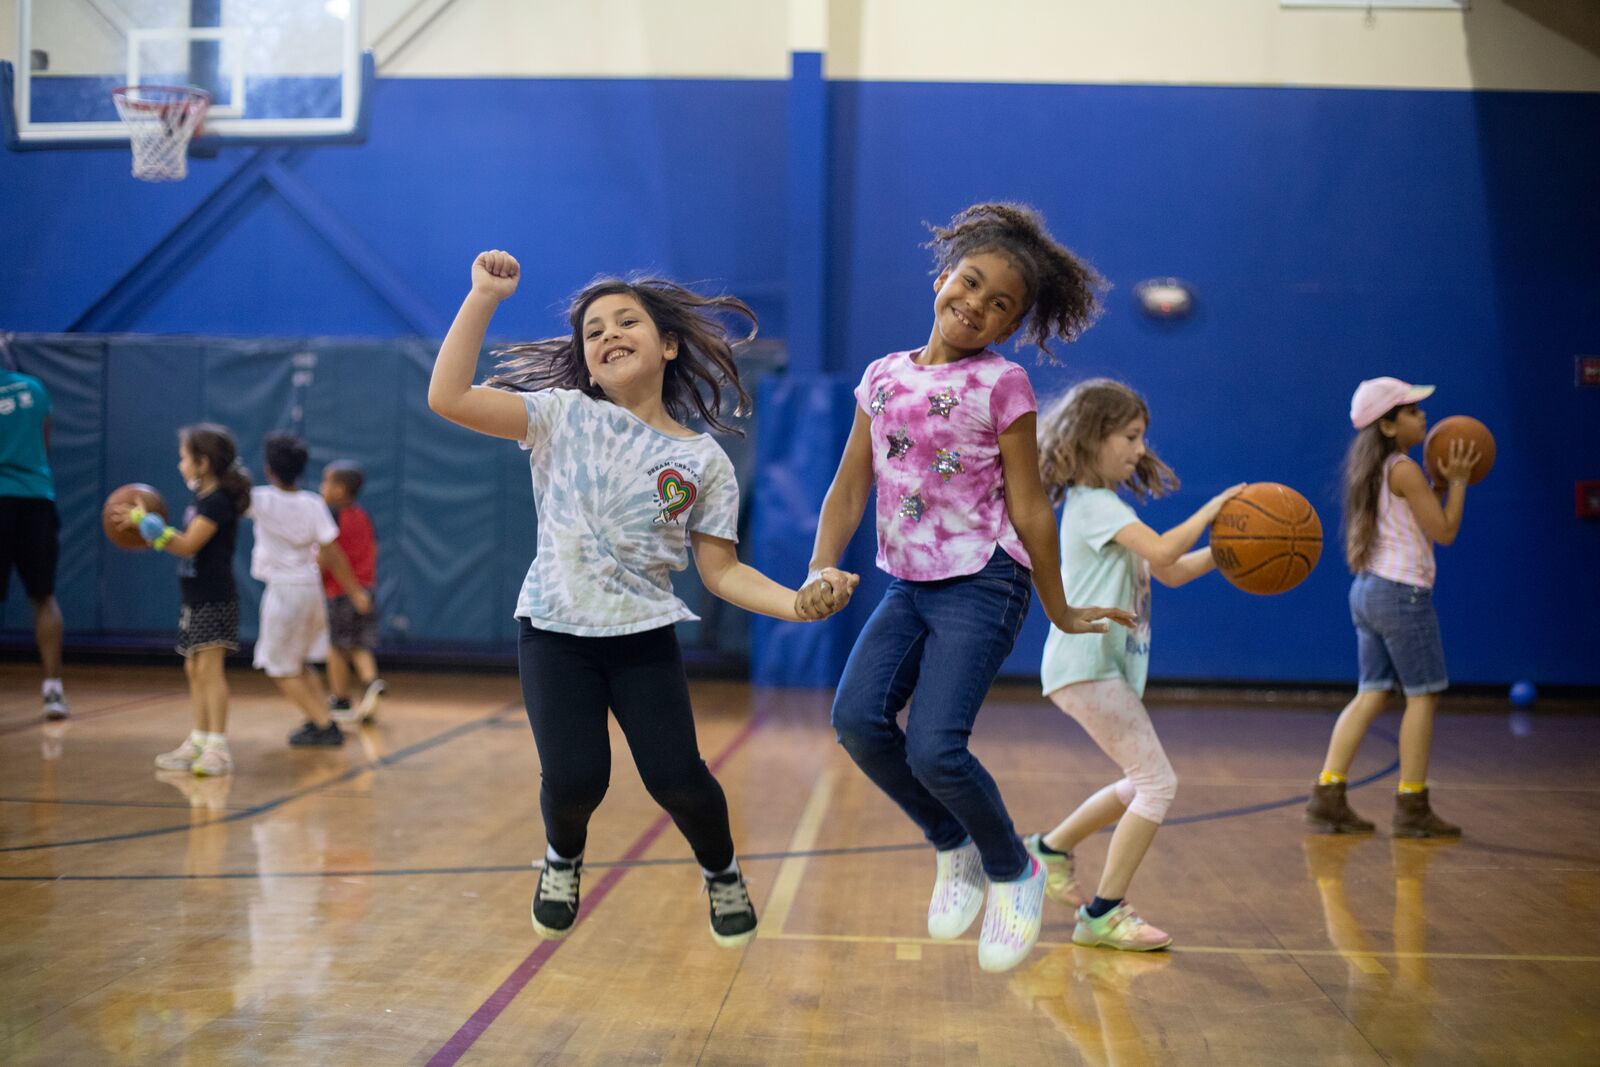 Two elementary aged girls jumping in a gym surrounded by playing children